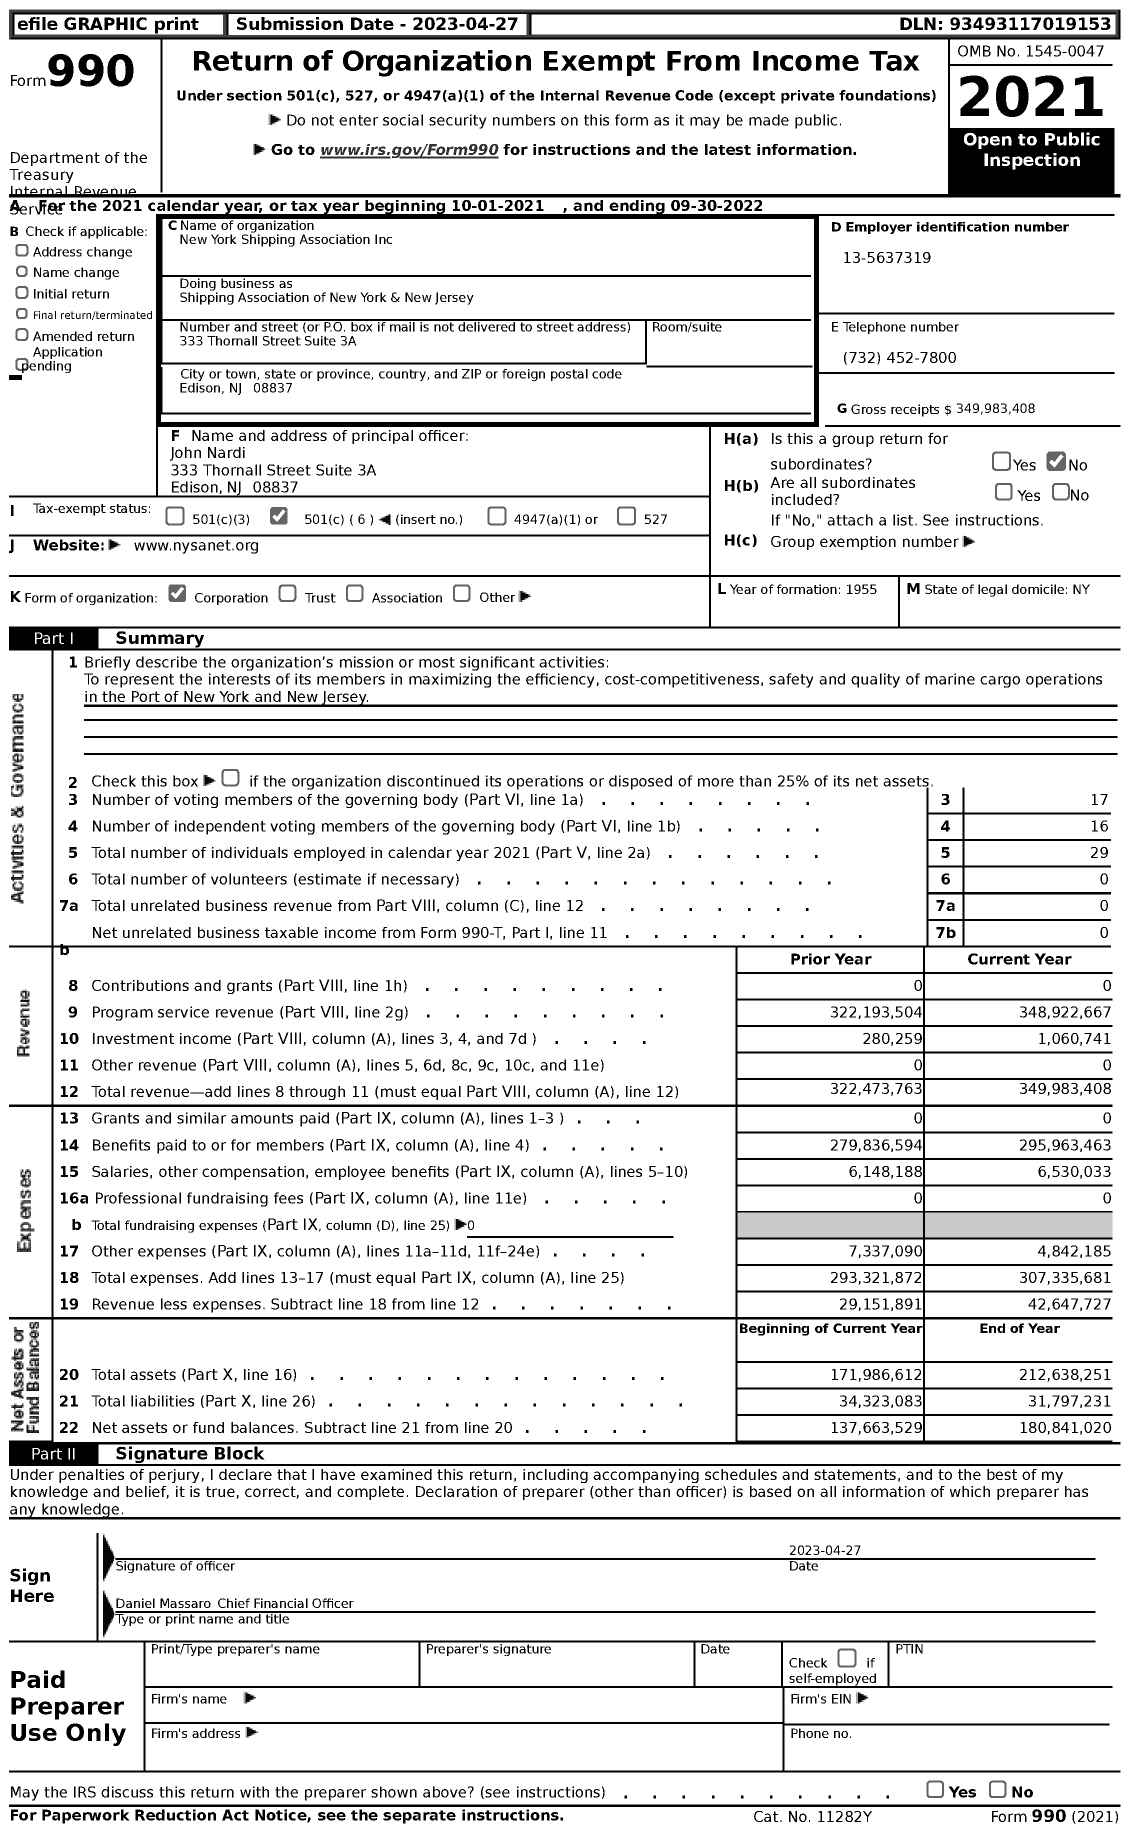 Image of first page of 2021 Form 990 for Shipping Association of New York & New Jersey